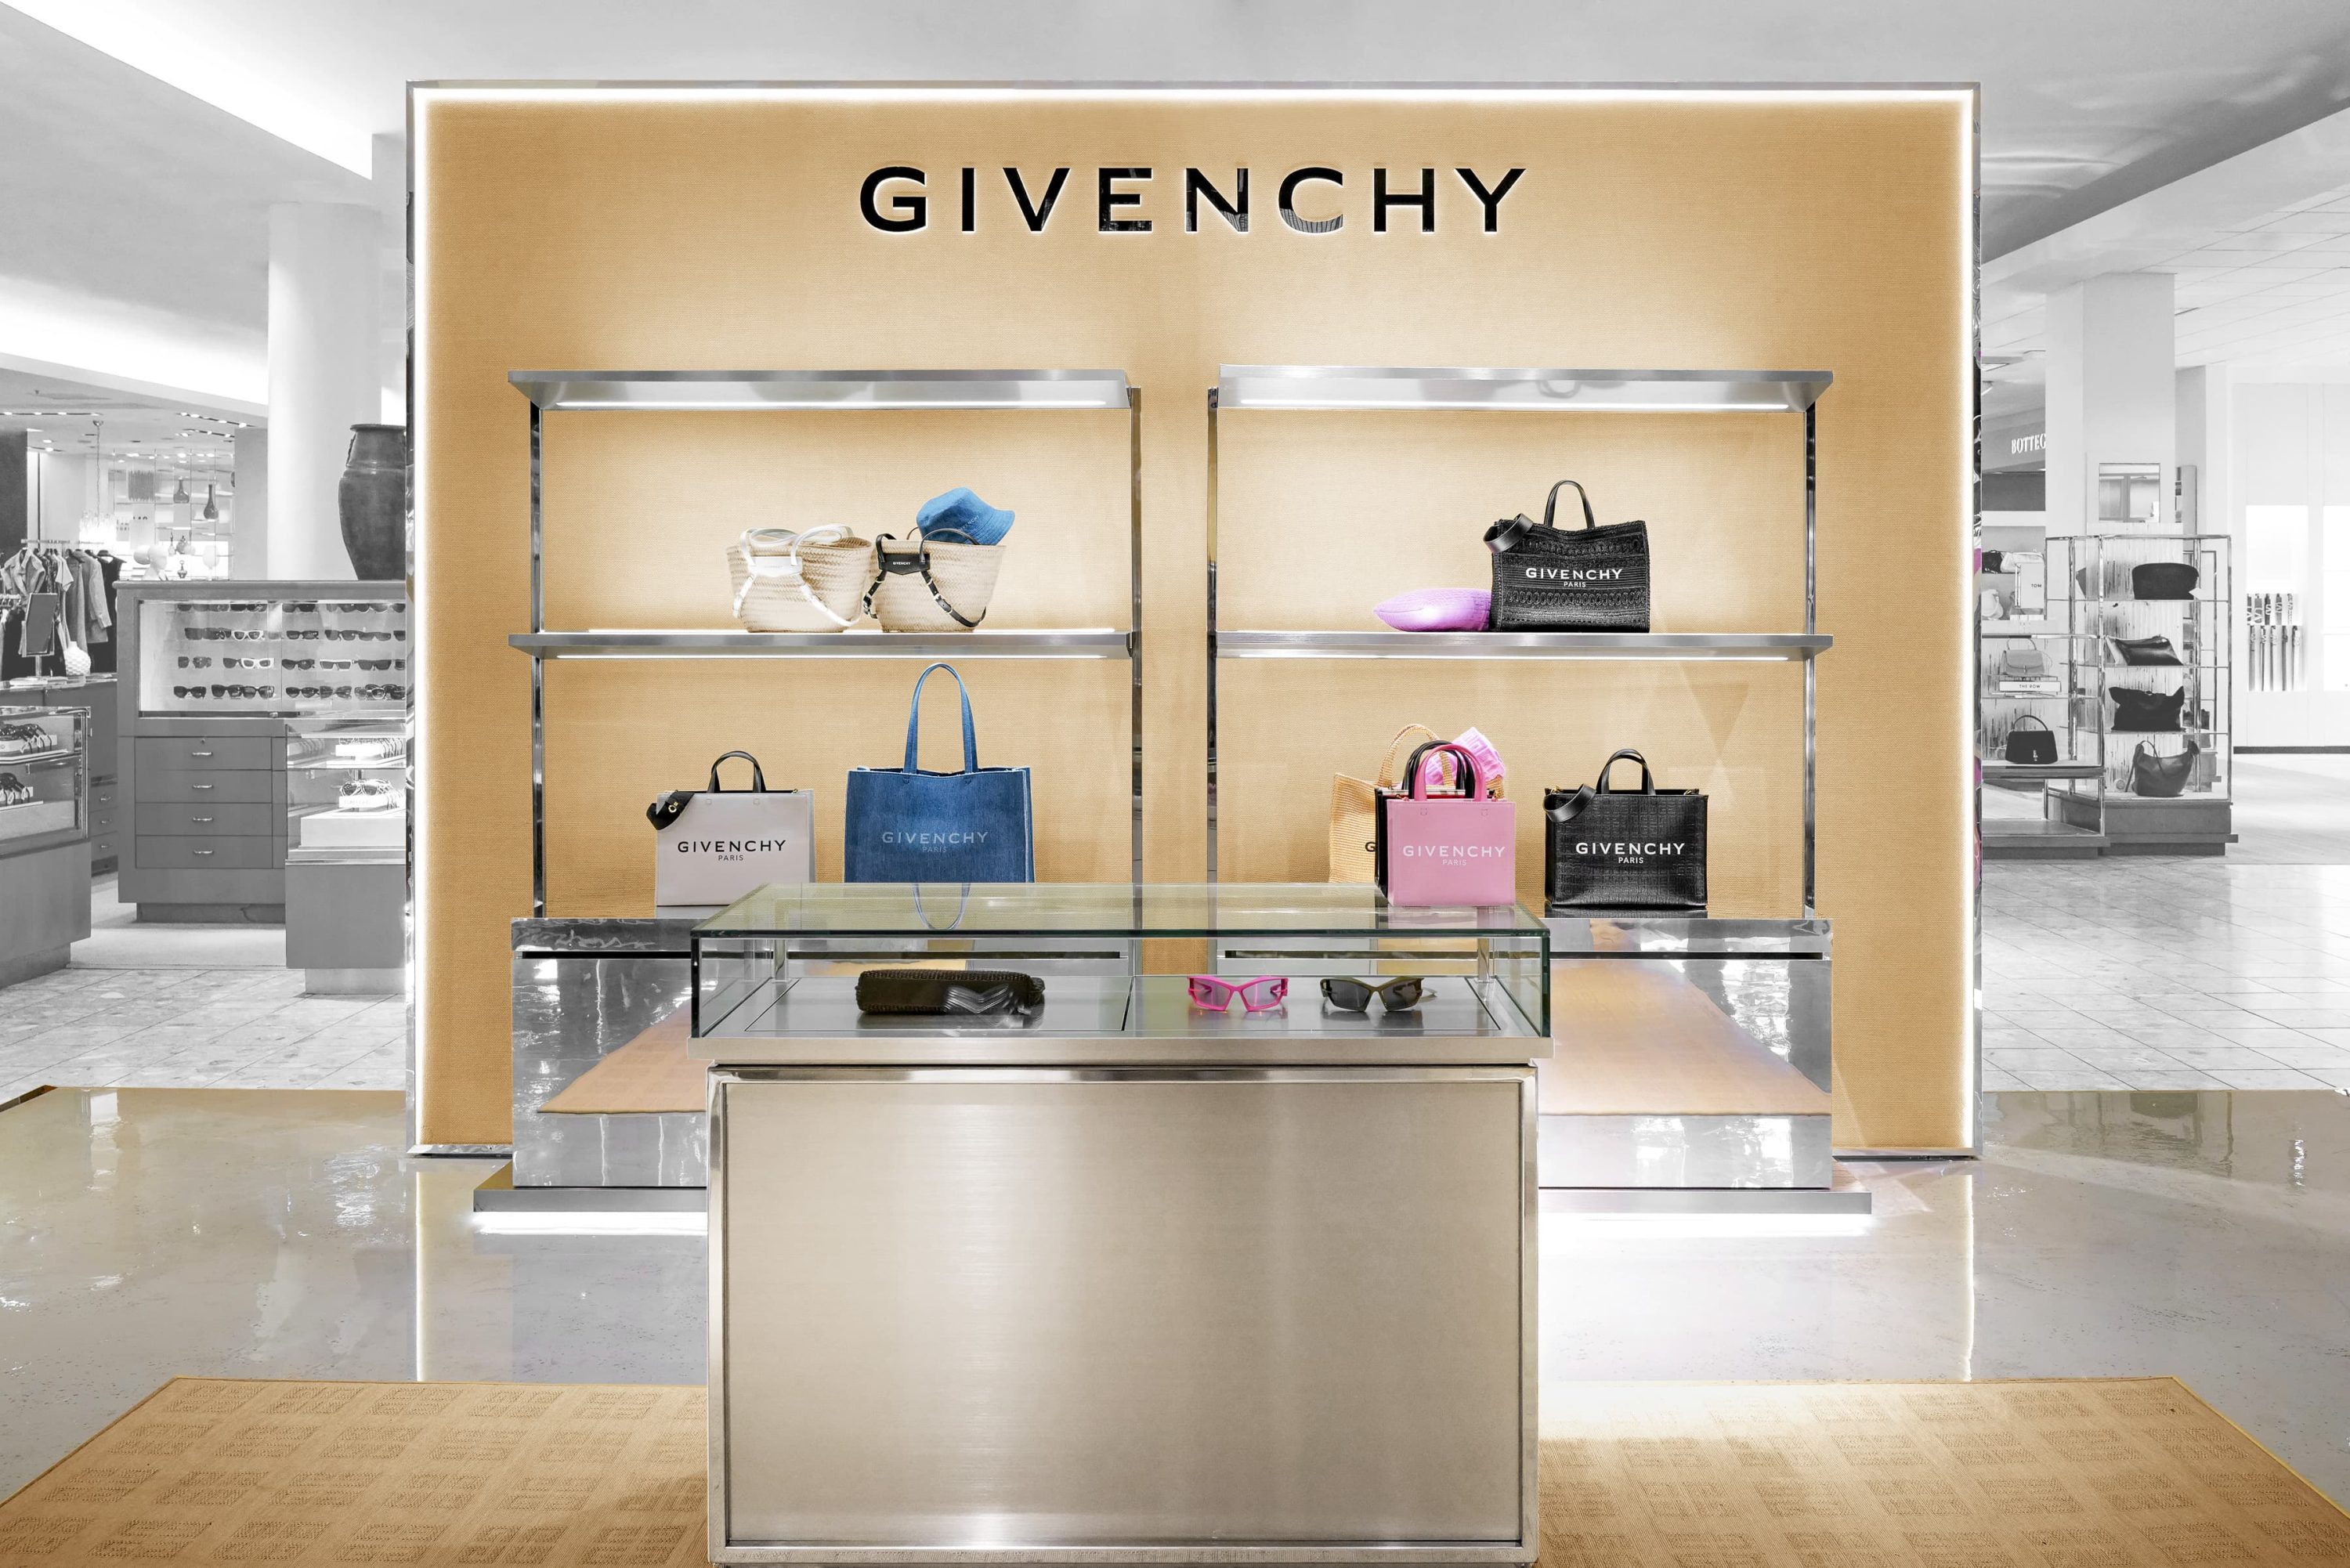 Neiman Marcus and Givenchy Forge Exclusive Partnership for Plage